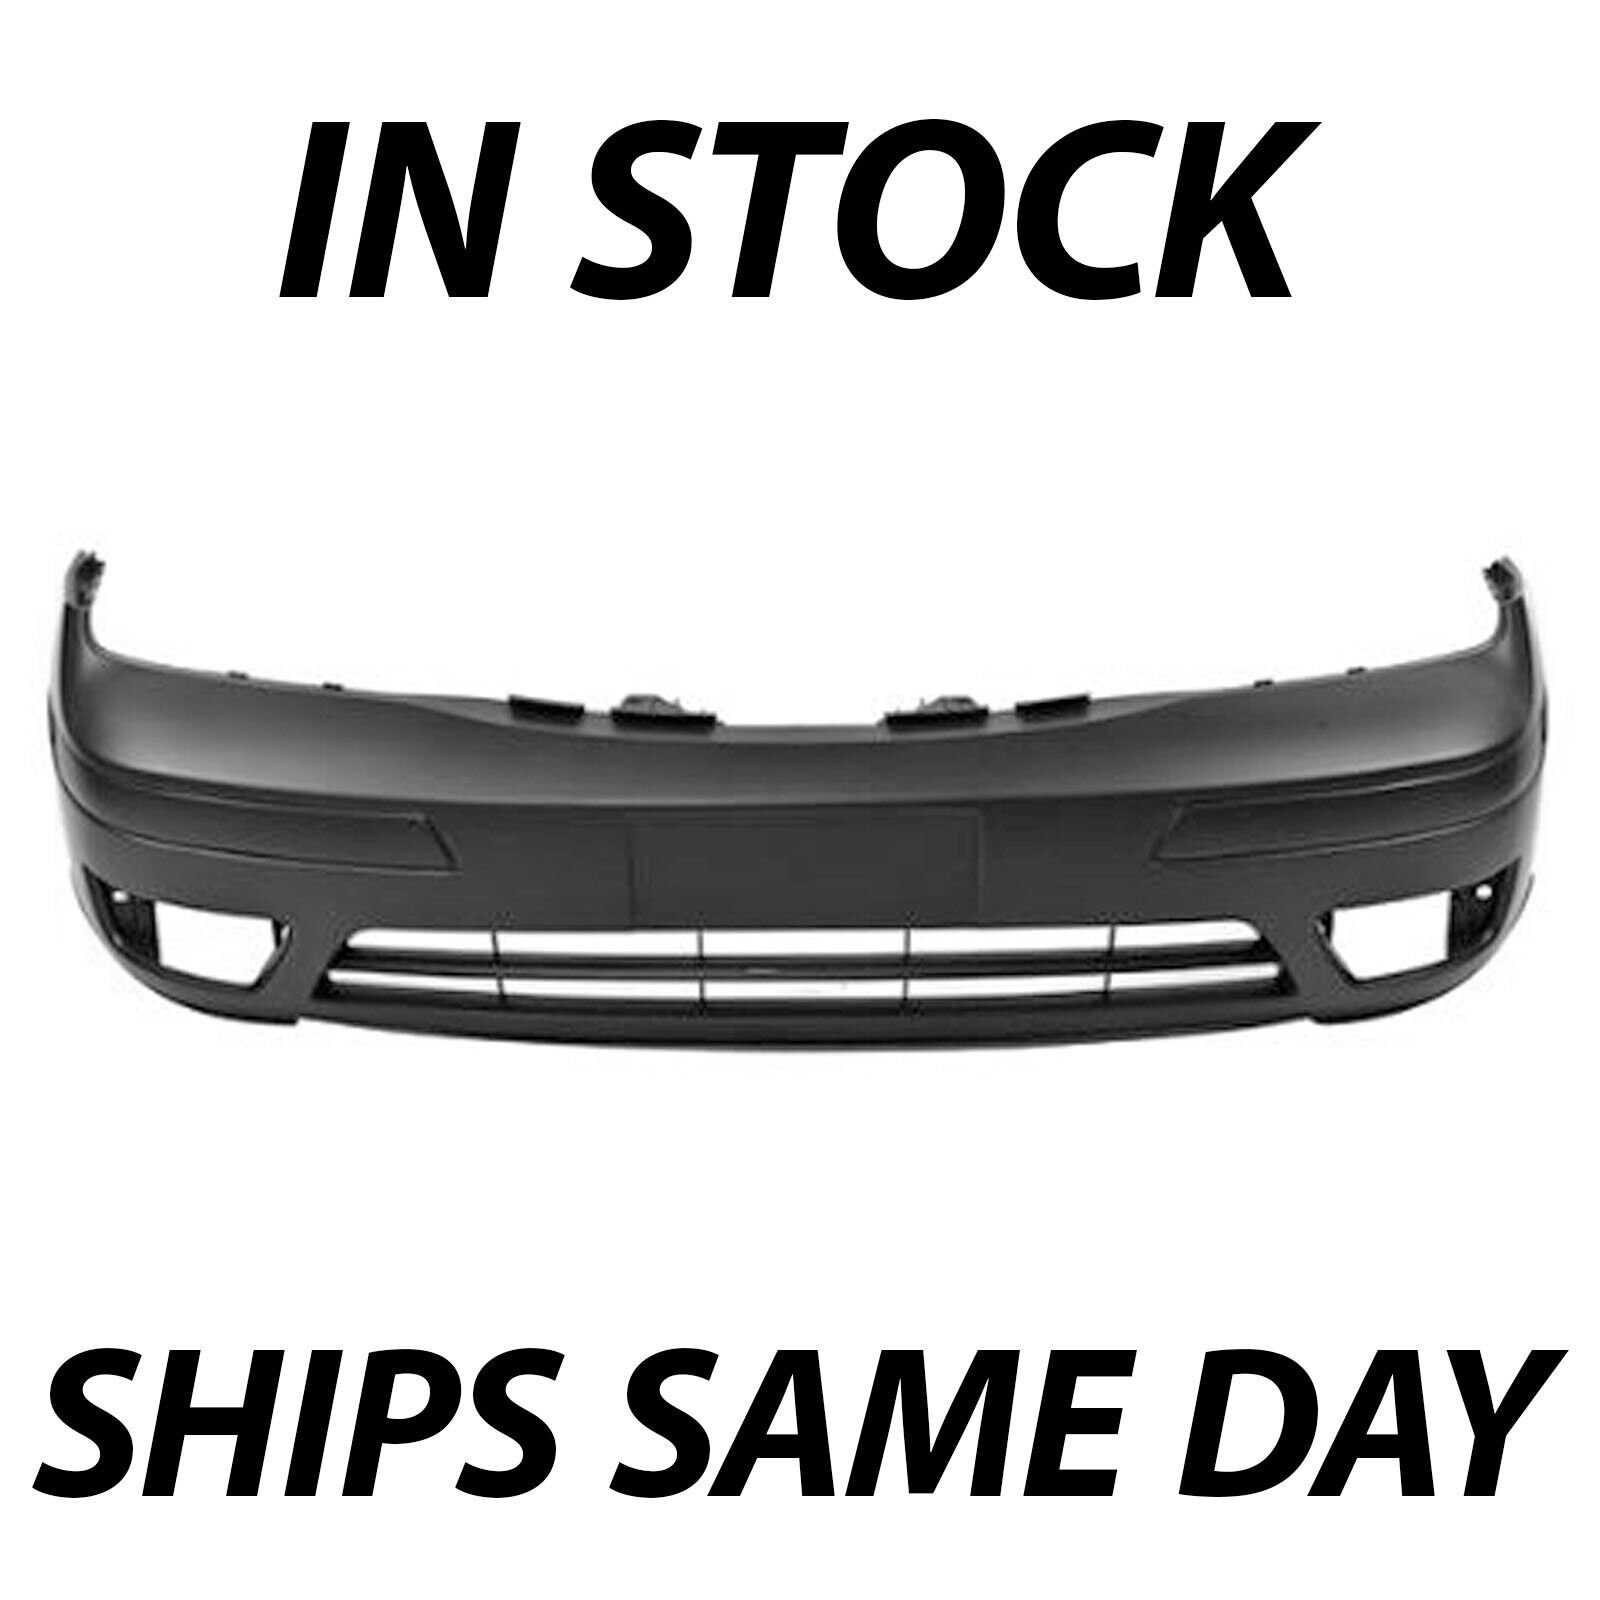 NEW Primered Front Bumper Replacement Fascia for 2005 2006 2007 Ford Focus 05-07